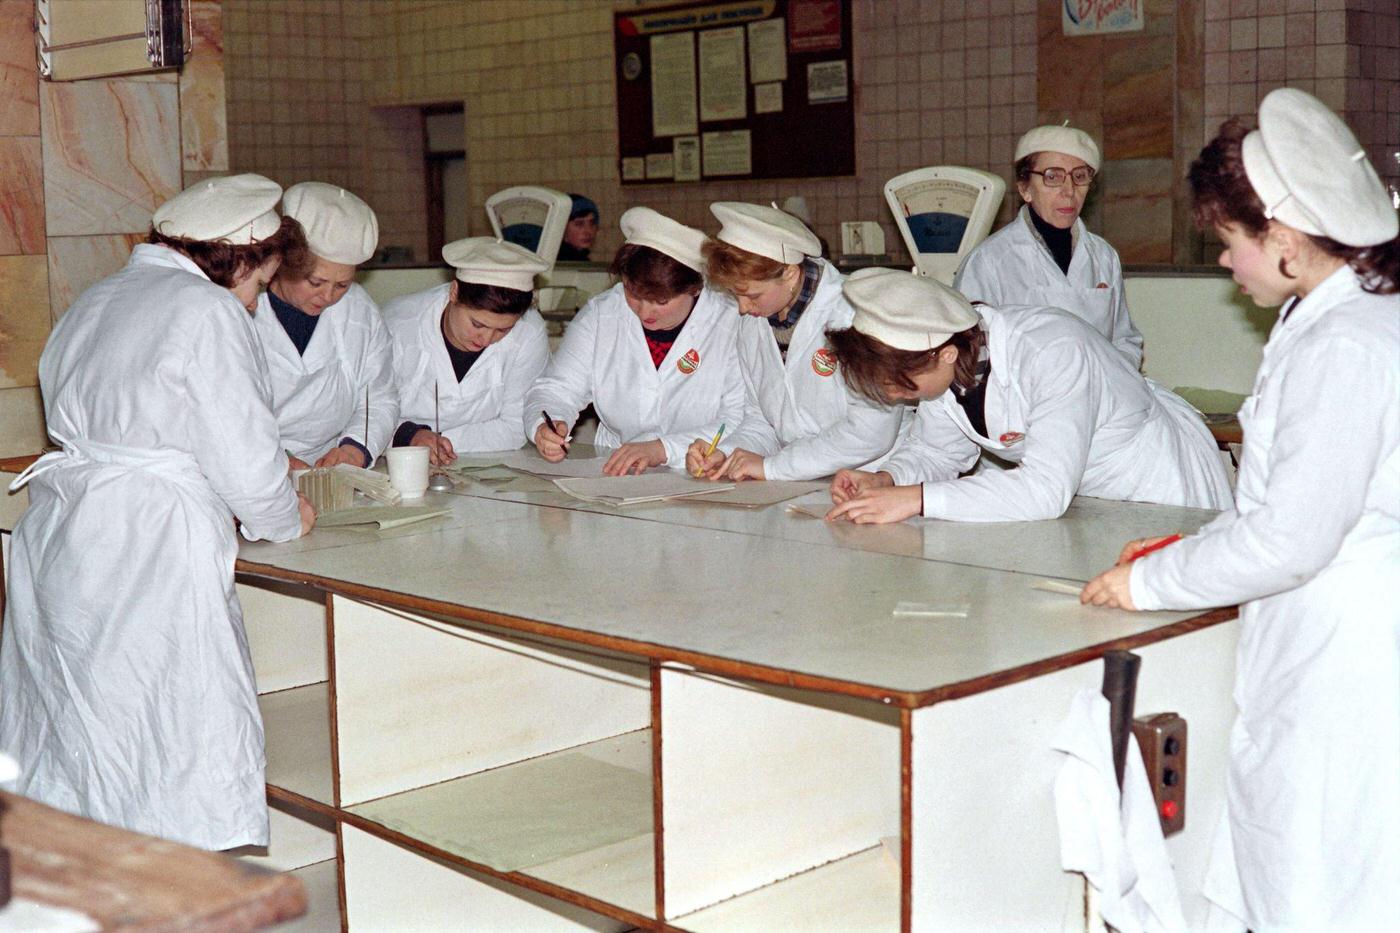 Supermarket Workers in Kiev Update Price Tags During Economic Changes, 1992